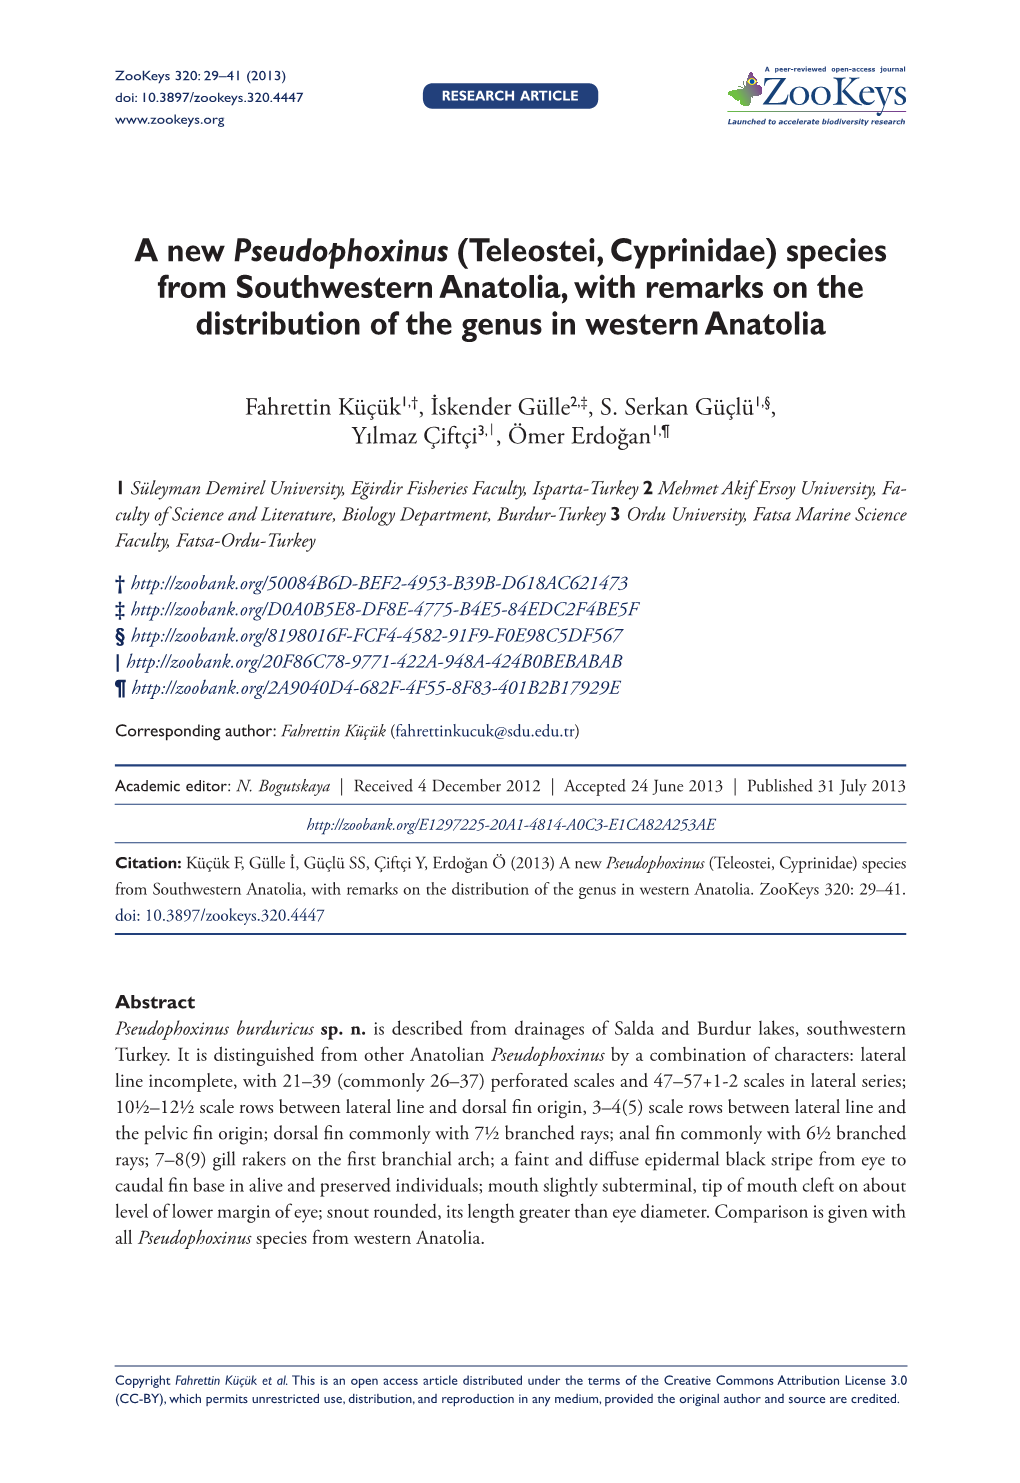 A New Pseudophoxinus (Teleostei, Cyprinidae) Species from Southwestern Anatolia, with Remarks on the Distribution of the Genus in Western Anatolia